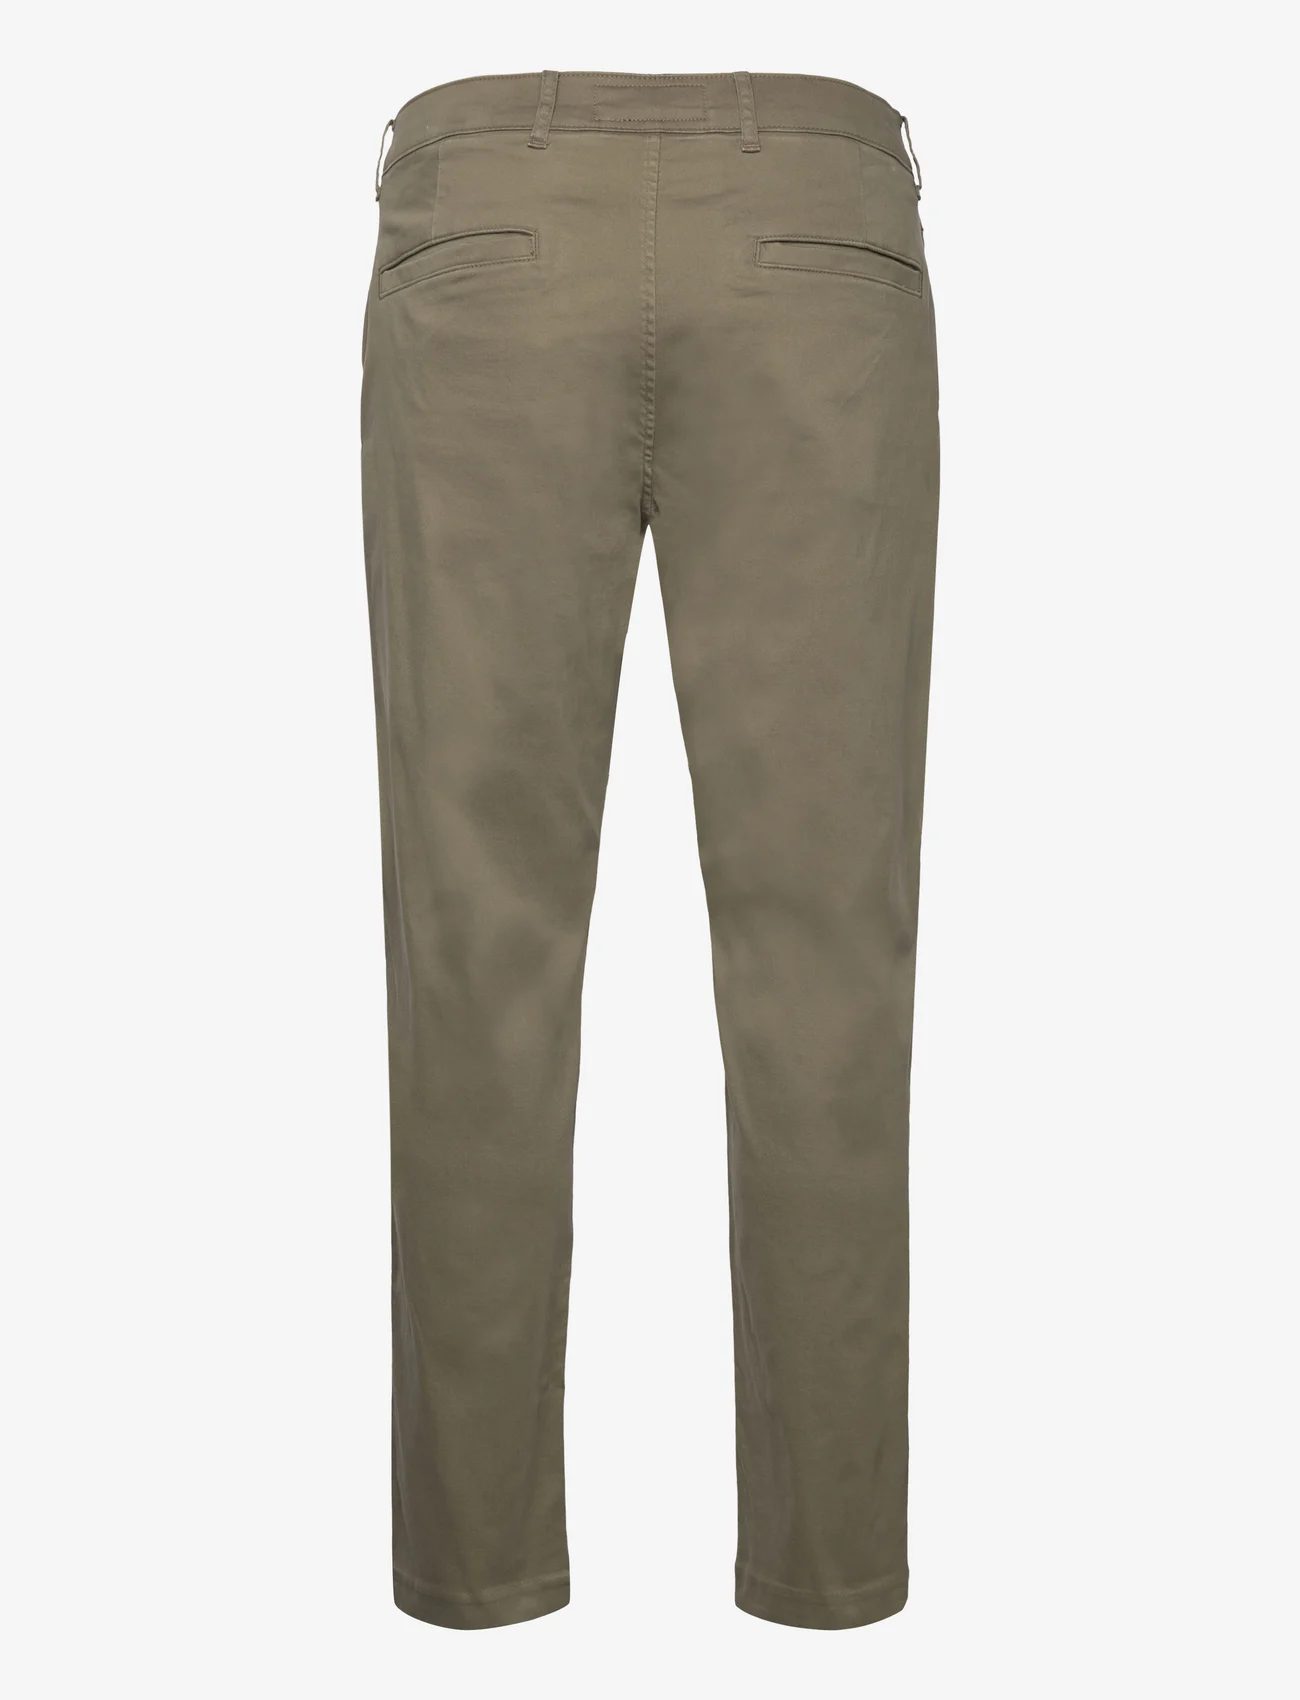 Abercrombie & Fitch - ANF MENS PANTS - chino püksid - grape leaf - 1